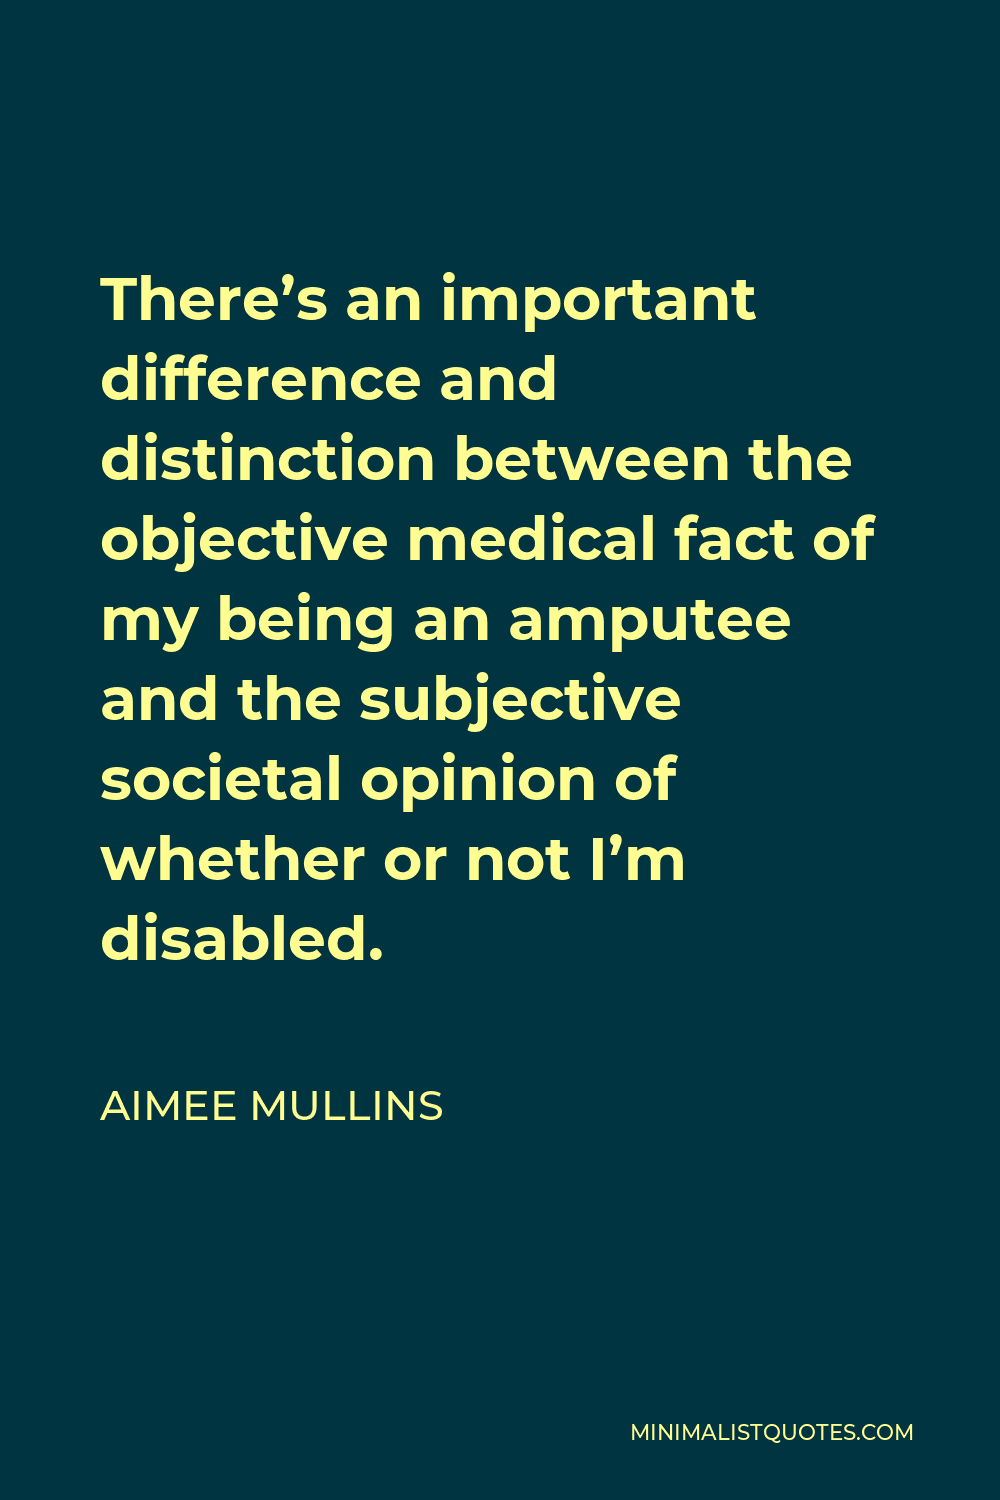 Aimee Mullins Quote - There’s an important difference and distinction between the objective medical fact of my being an amputee and the subjective societal opinion of whether or not I’m disabled.